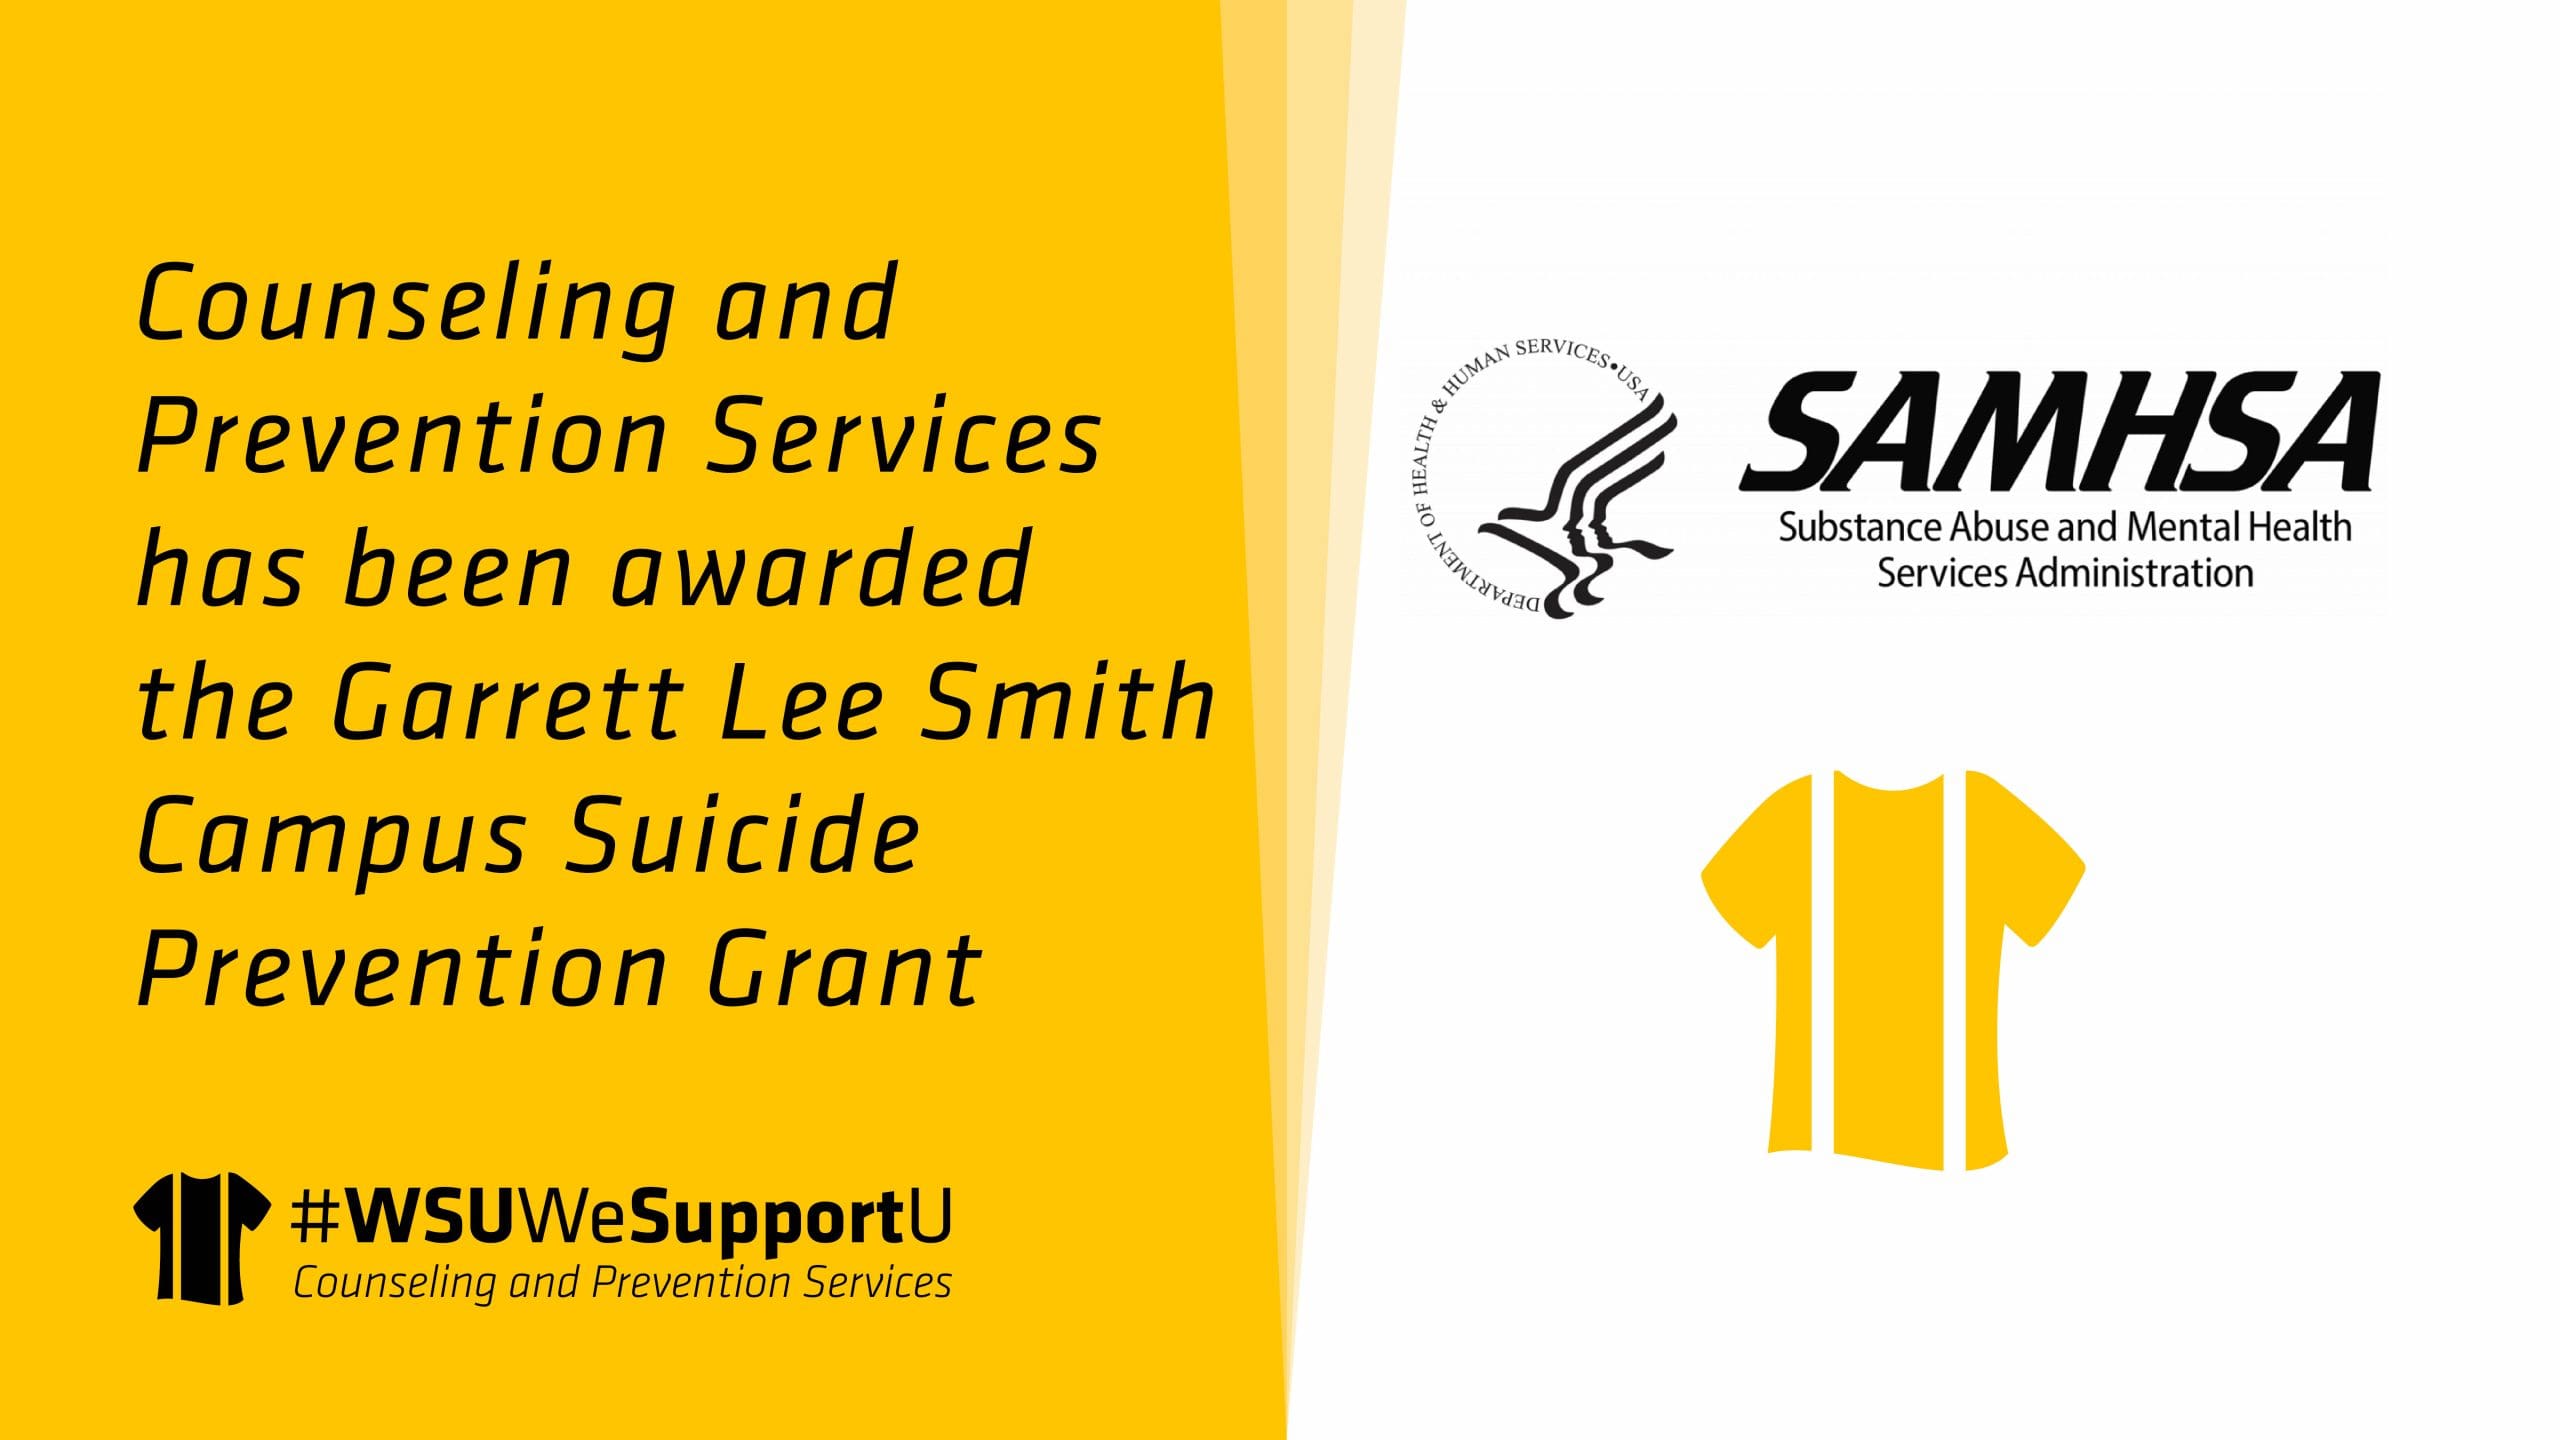 Counseling and Prevention Services has been awarded the Garrett Lee Smith Campus Suicide Prevention Grant